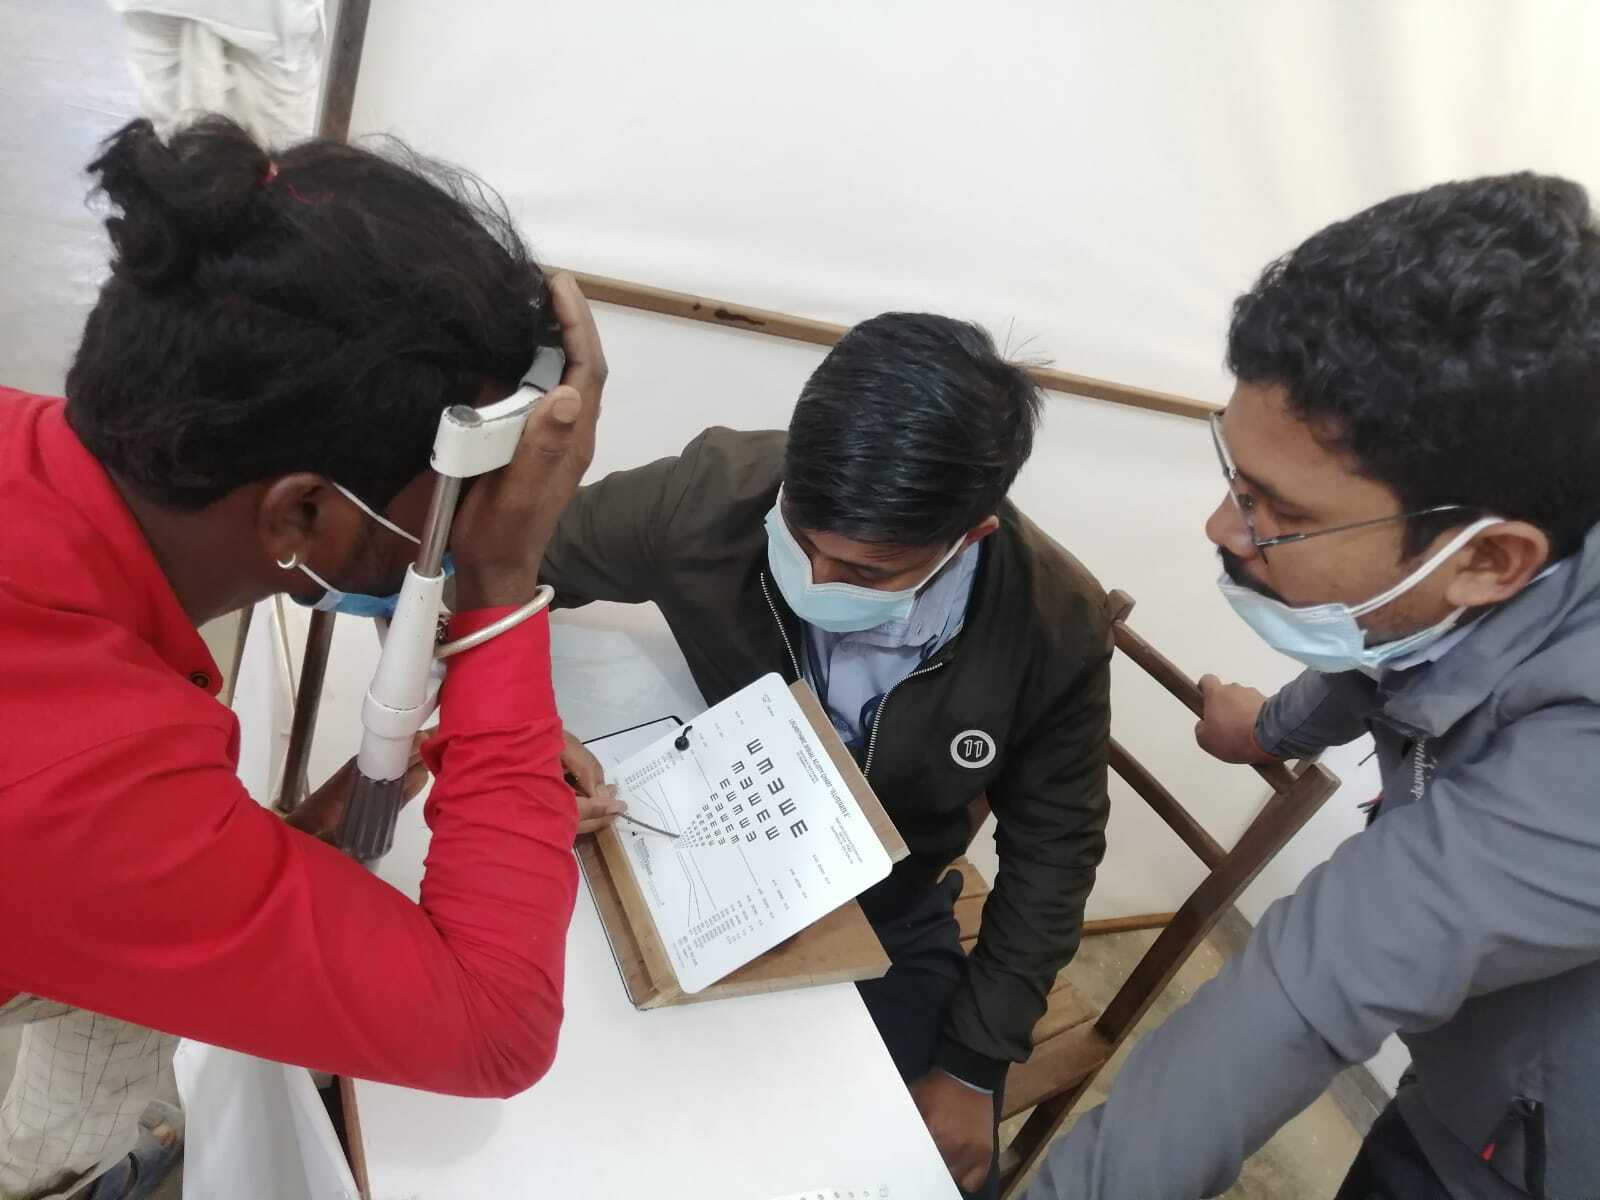 An individual undergoing an eye test, covering one eye as part of the examination process.